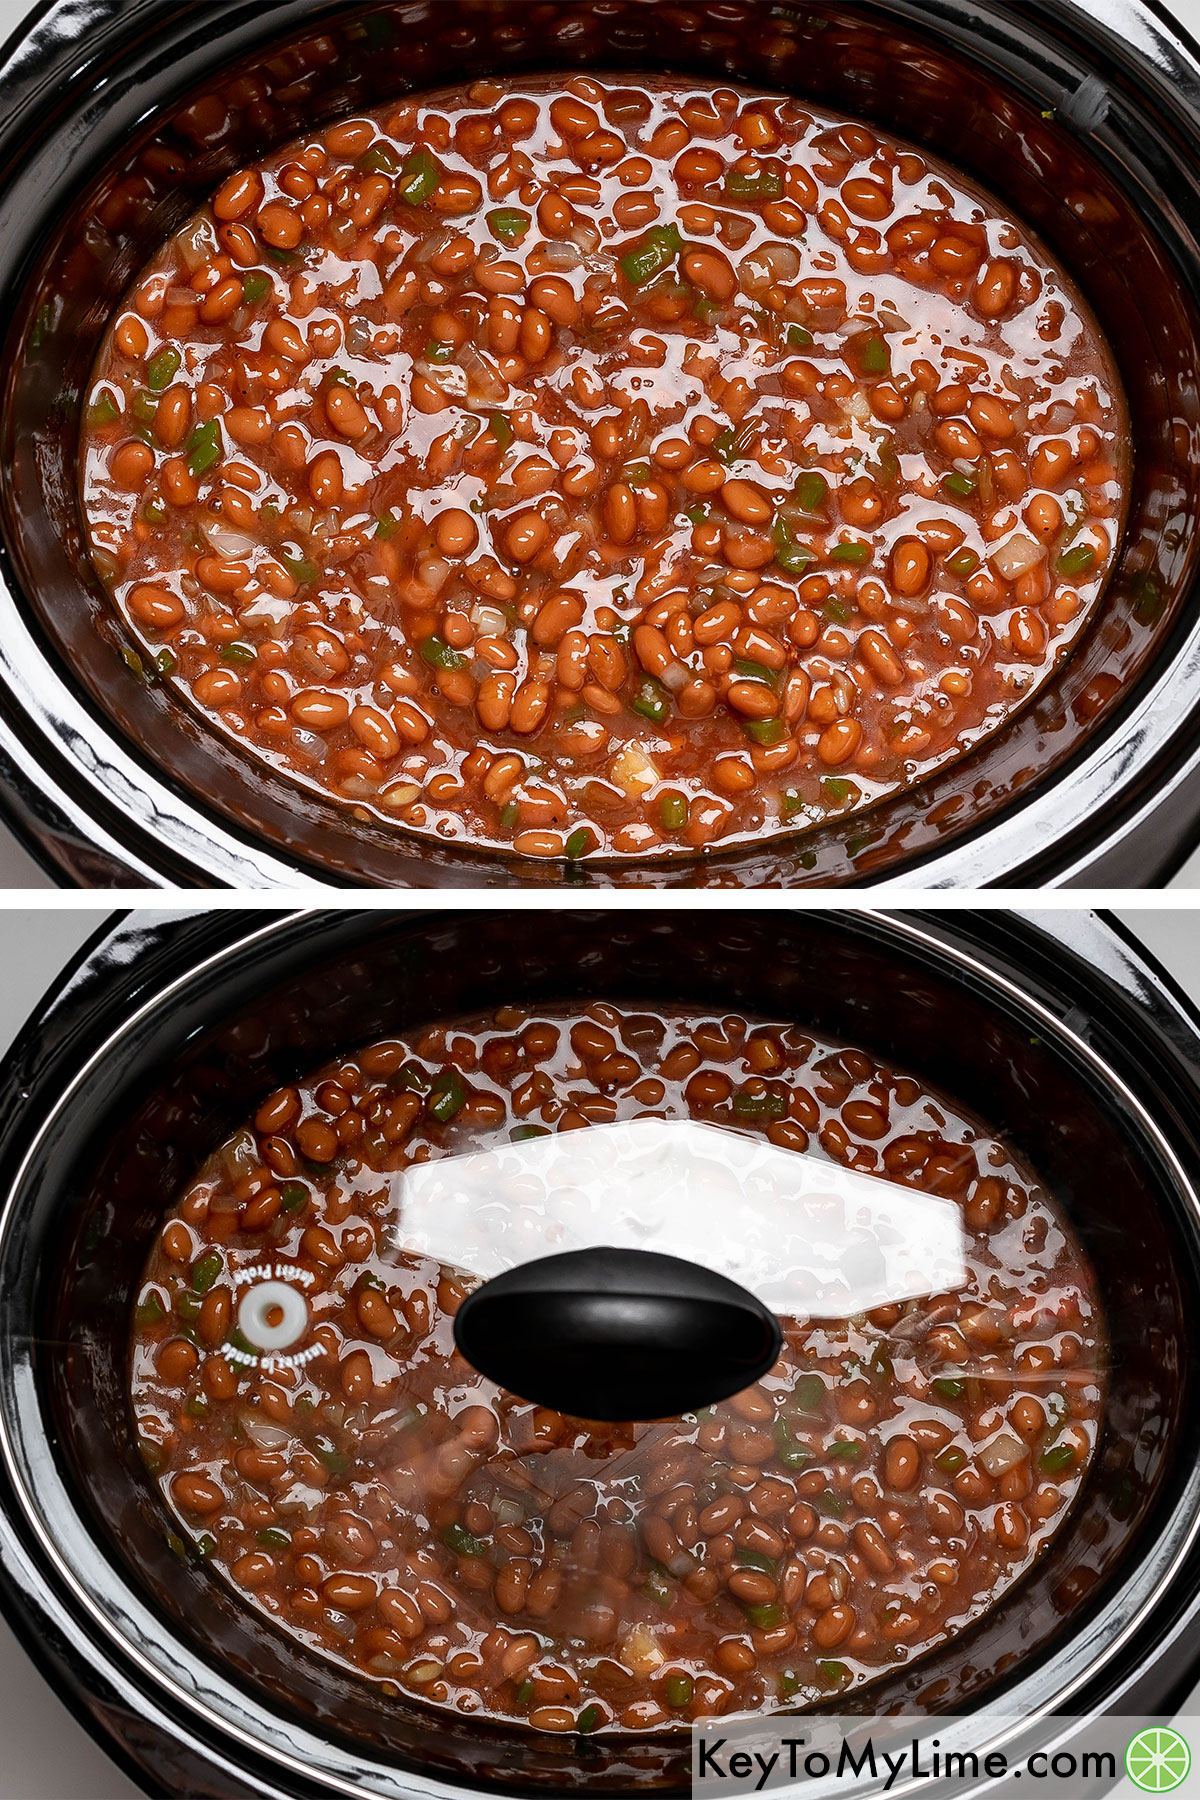 Stirring together the baked bean ingredients then covering with a lid and cooking on low.